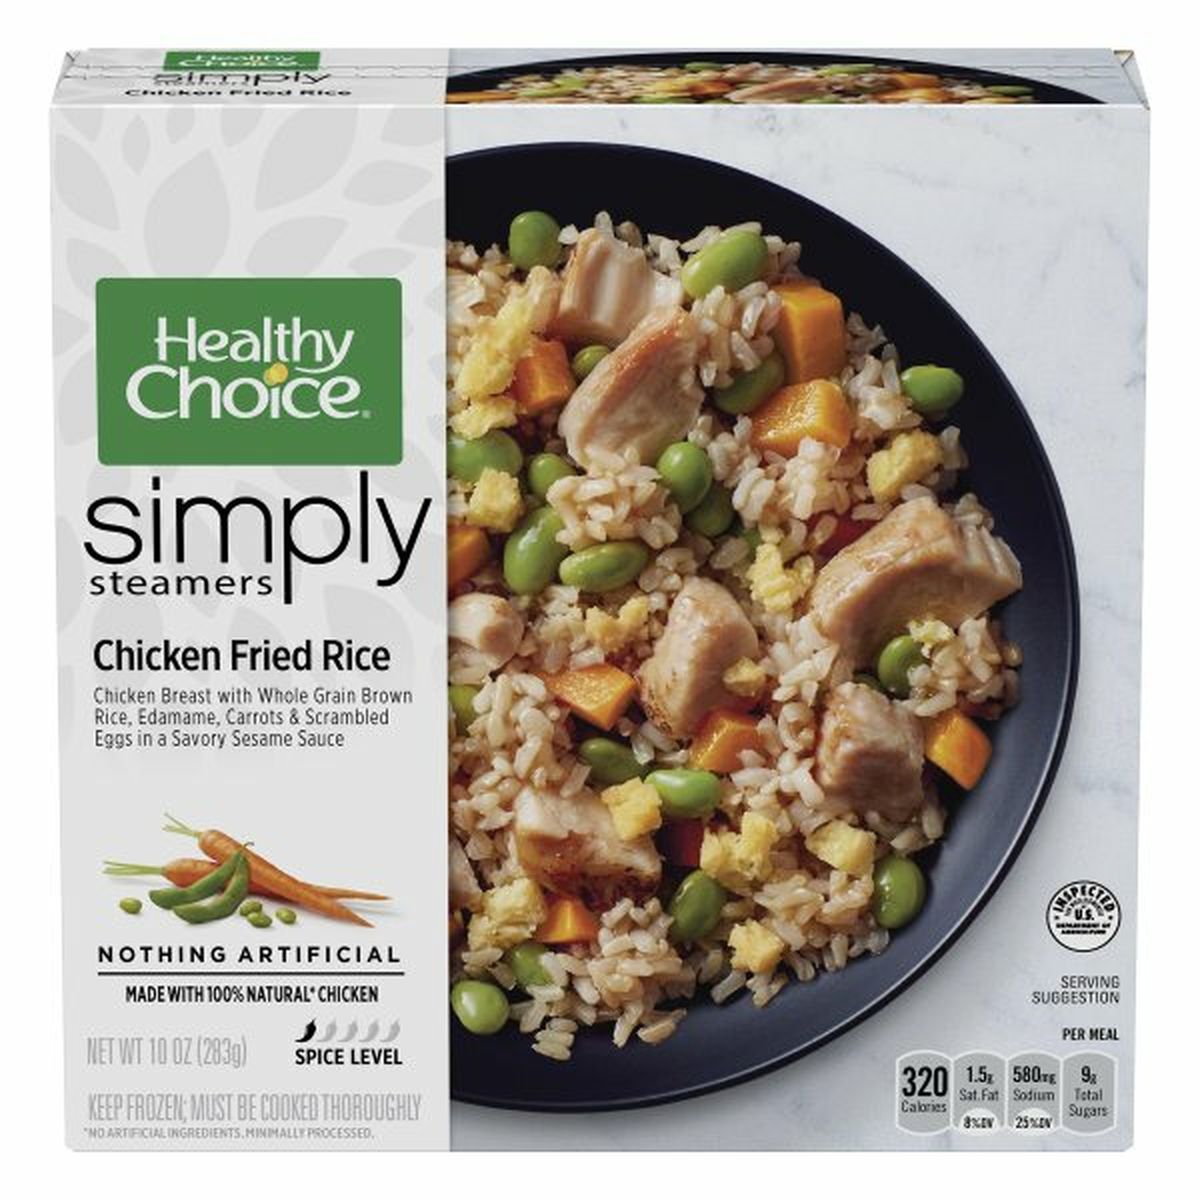 Calories in Healthy Choice Simply Steamers Chicken Fried Rice